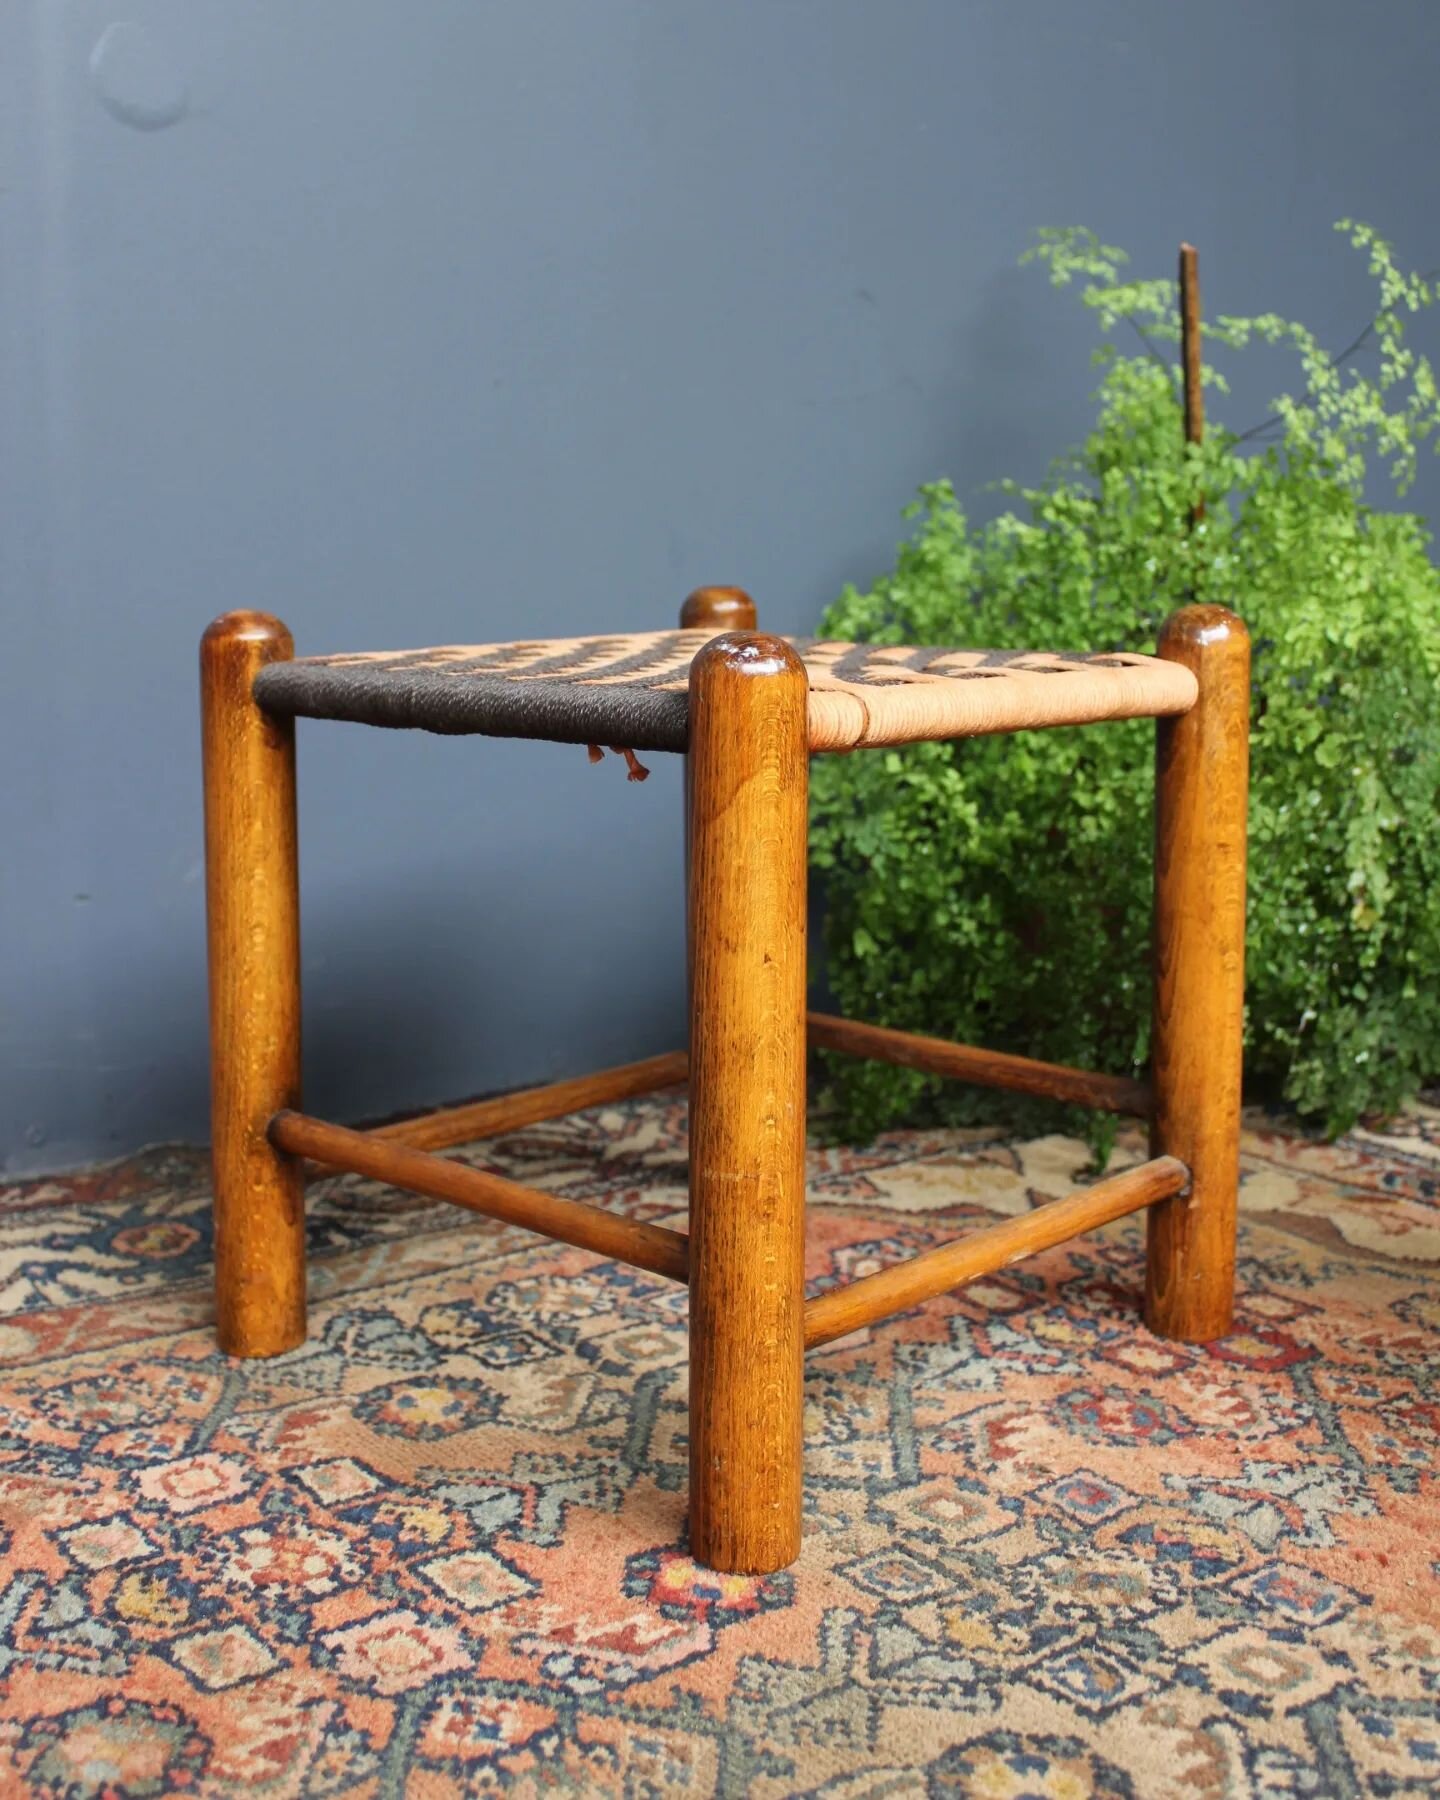 Little vintage stool&nbsp; with woven top.&nbsp; Made in England.
One side beam is bowed a little.&nbsp; It measures 300mm x 280mm x 300mm high.&nbsp; $45
Postage 18.95&nbsp; Australia wide.

Comment sold to purchase &amp; we will reply &amp; message